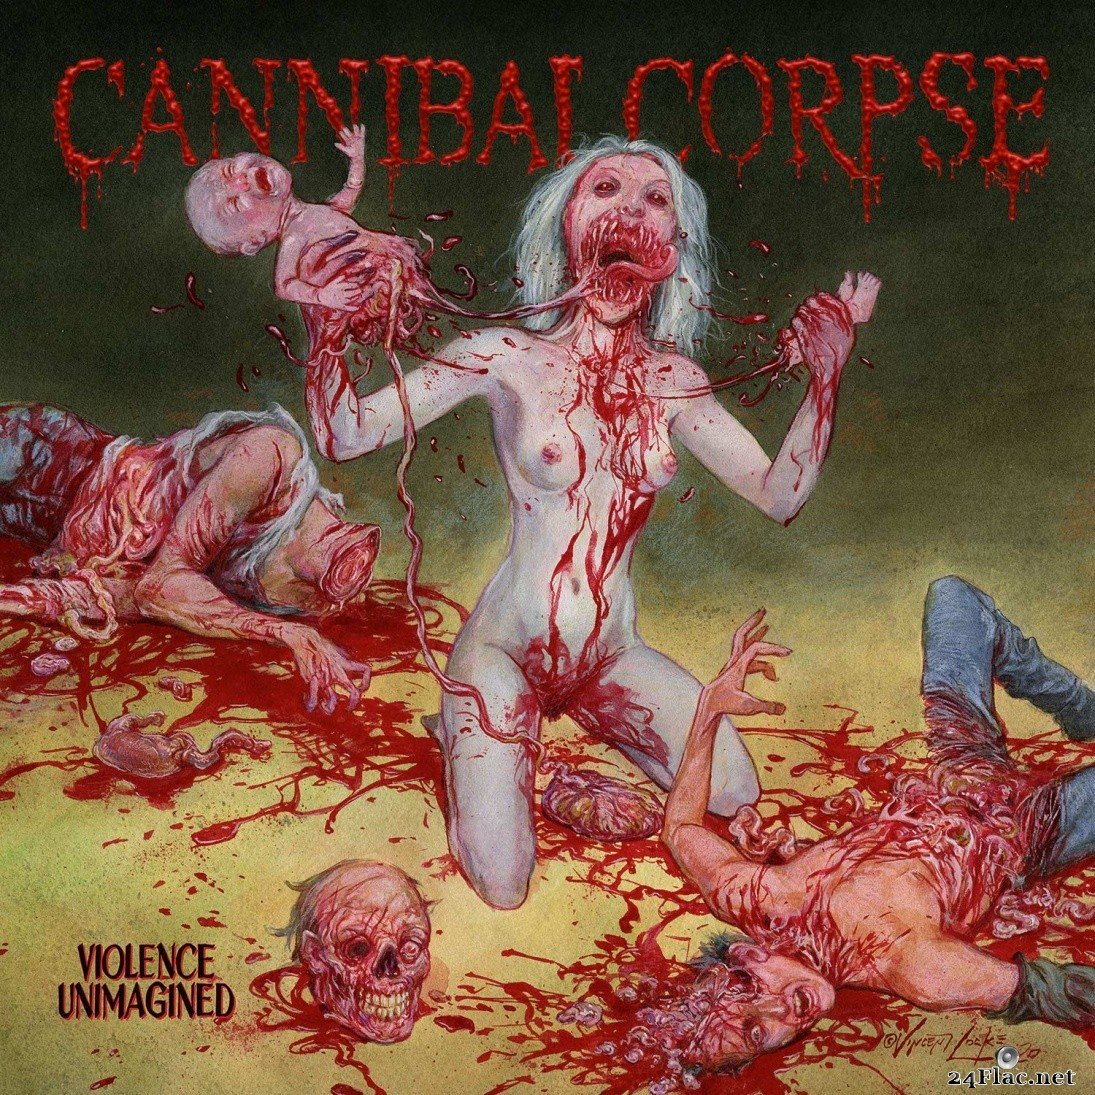 Cannibal Corpse - Violence Unimagined (2021) FLAC